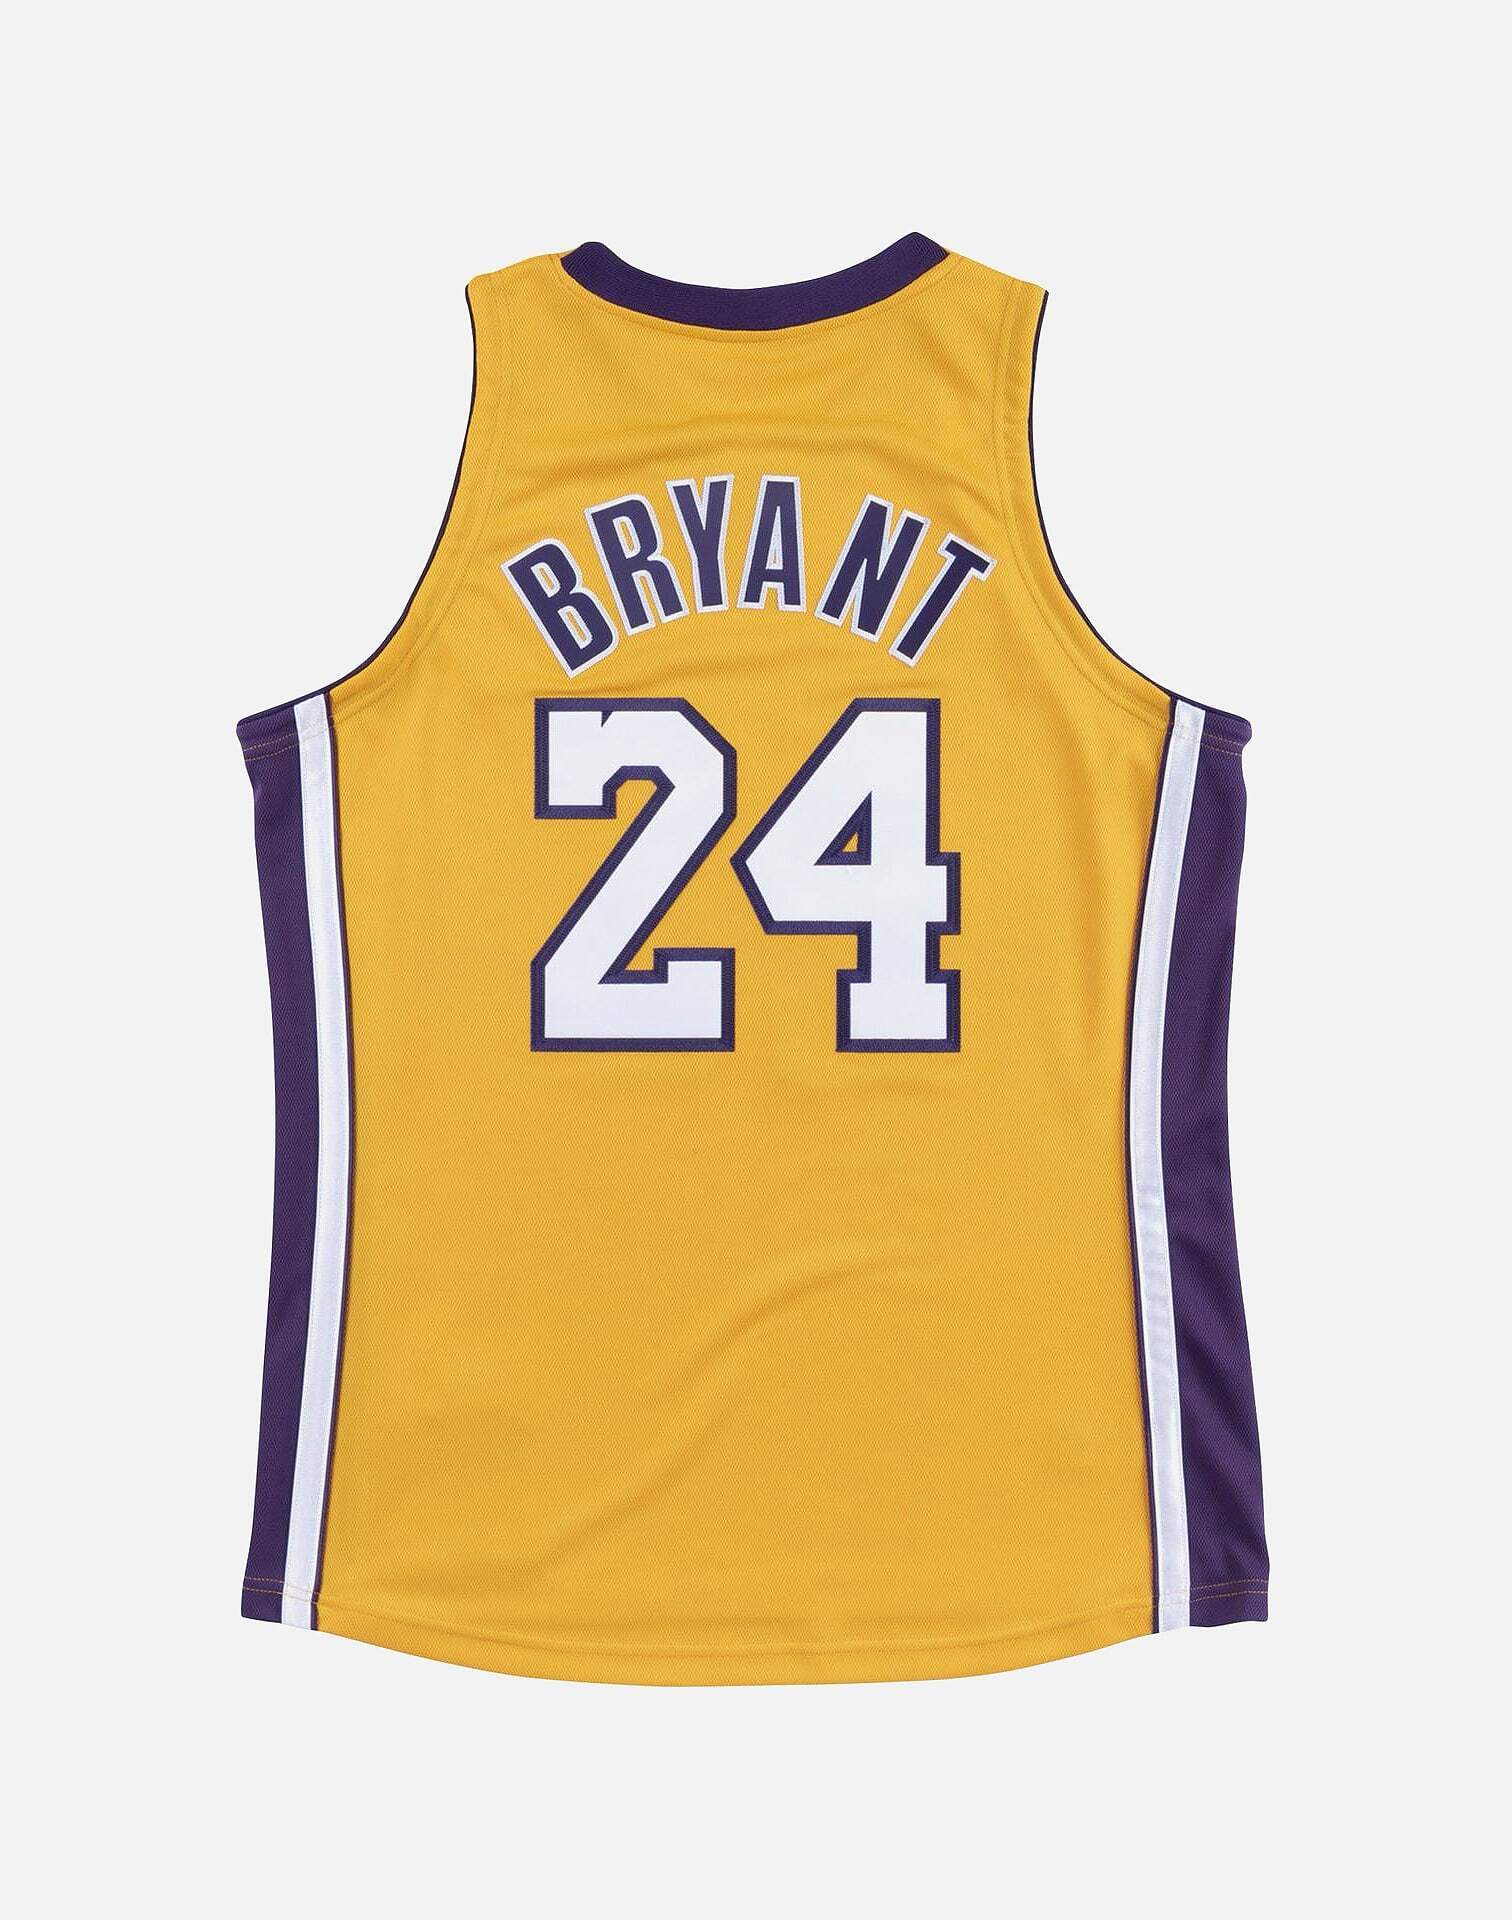 Los Angeles Dodgers #8/24 Kobe Bryant Stitched Jersey - Lakers